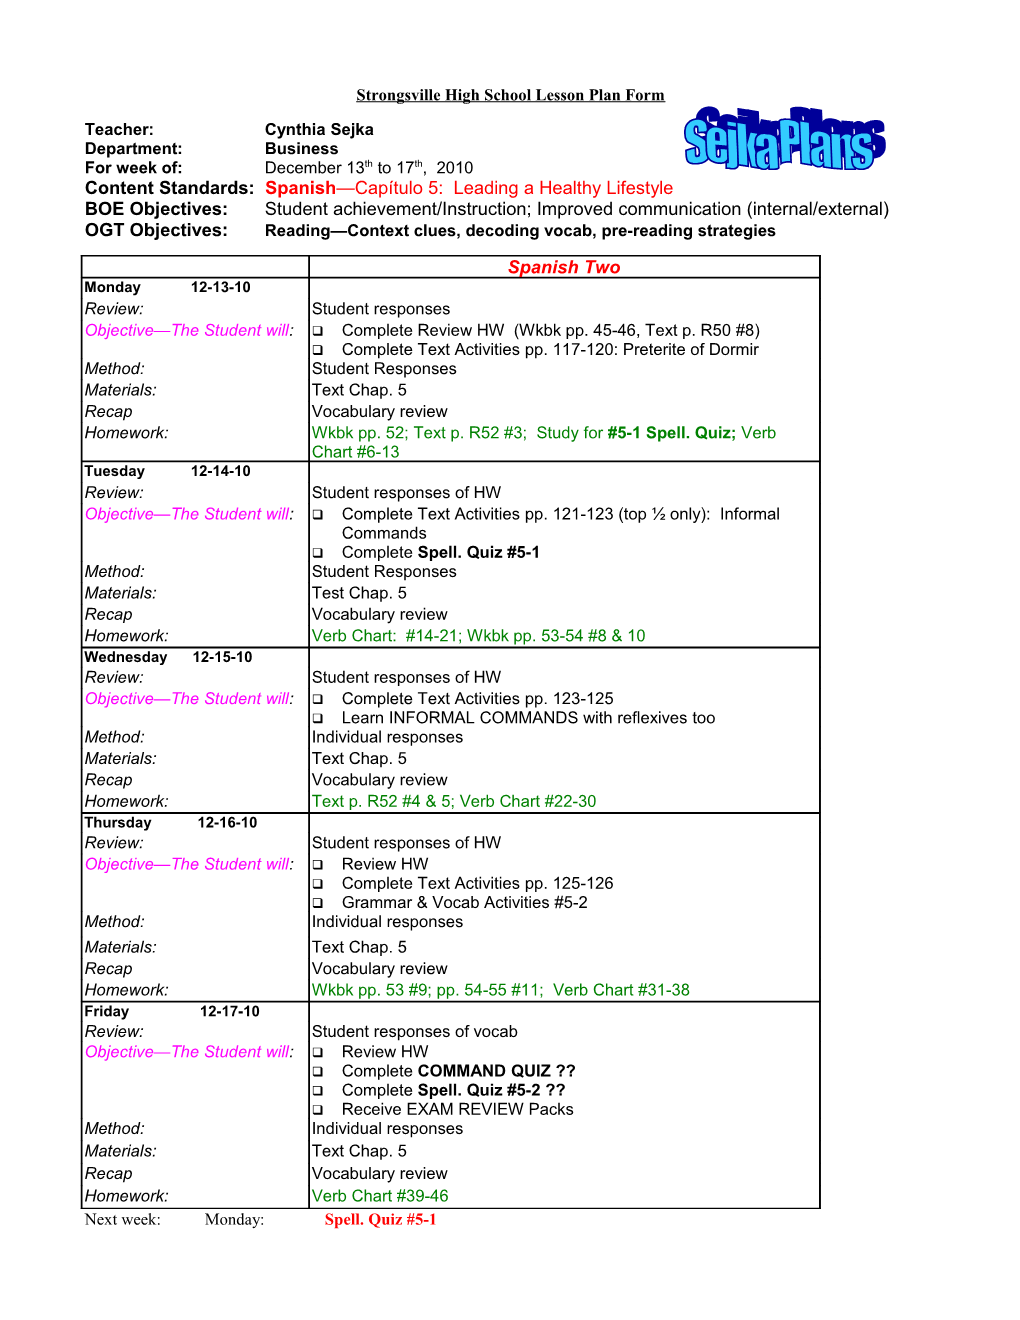 Strongsville High School Lesson Plan Form s2